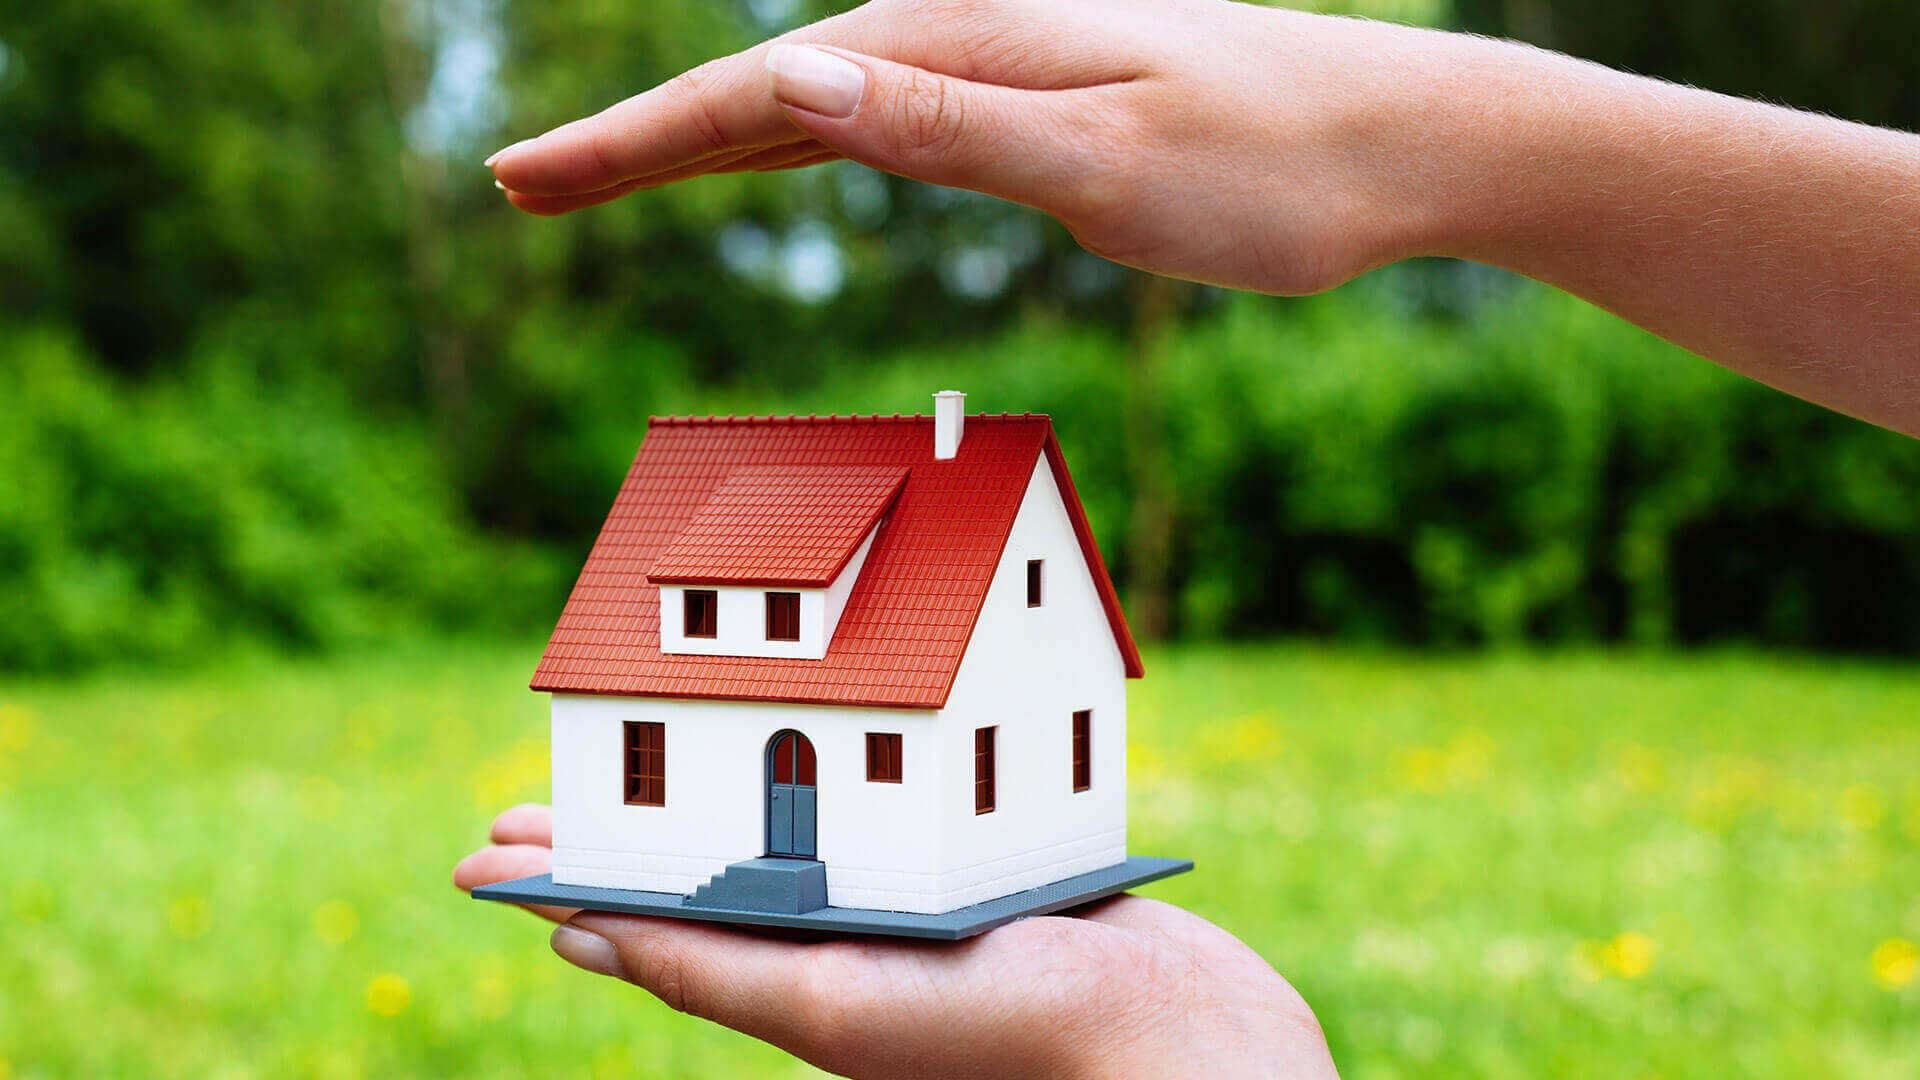 Types of Home Insurance Plans to Compare before Buying